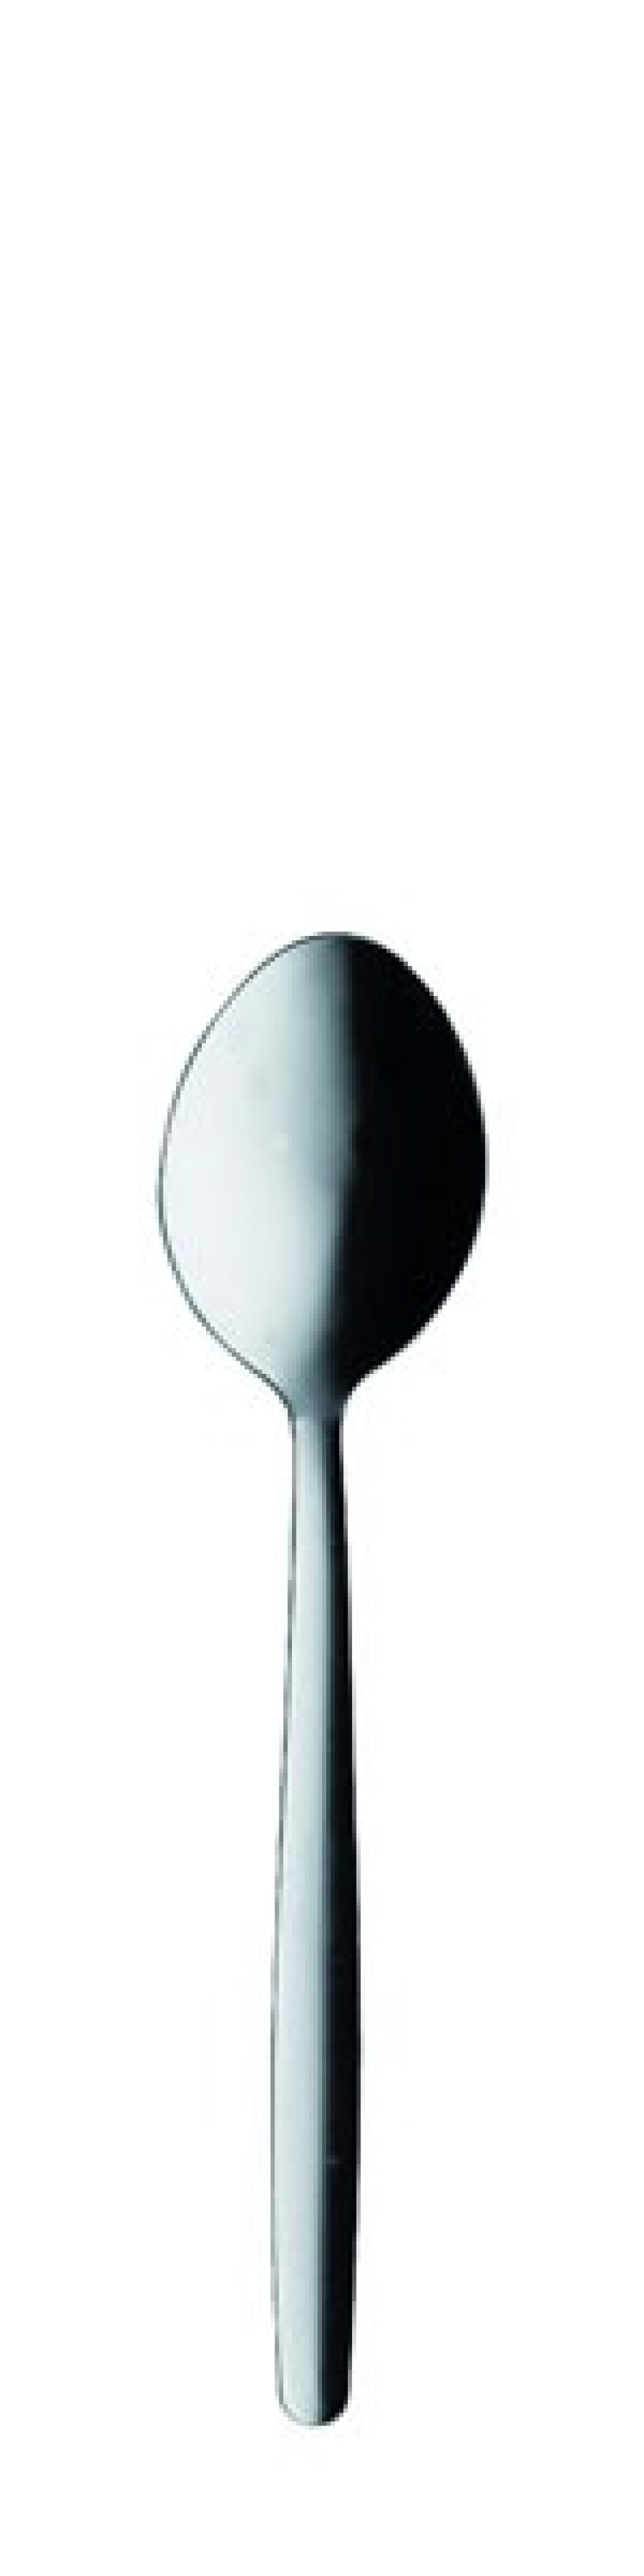 TM 80 Table spoon 188 mm - Solex in the group Table setting / Cutlery / Spoons at KitchenLab (1284-21399)